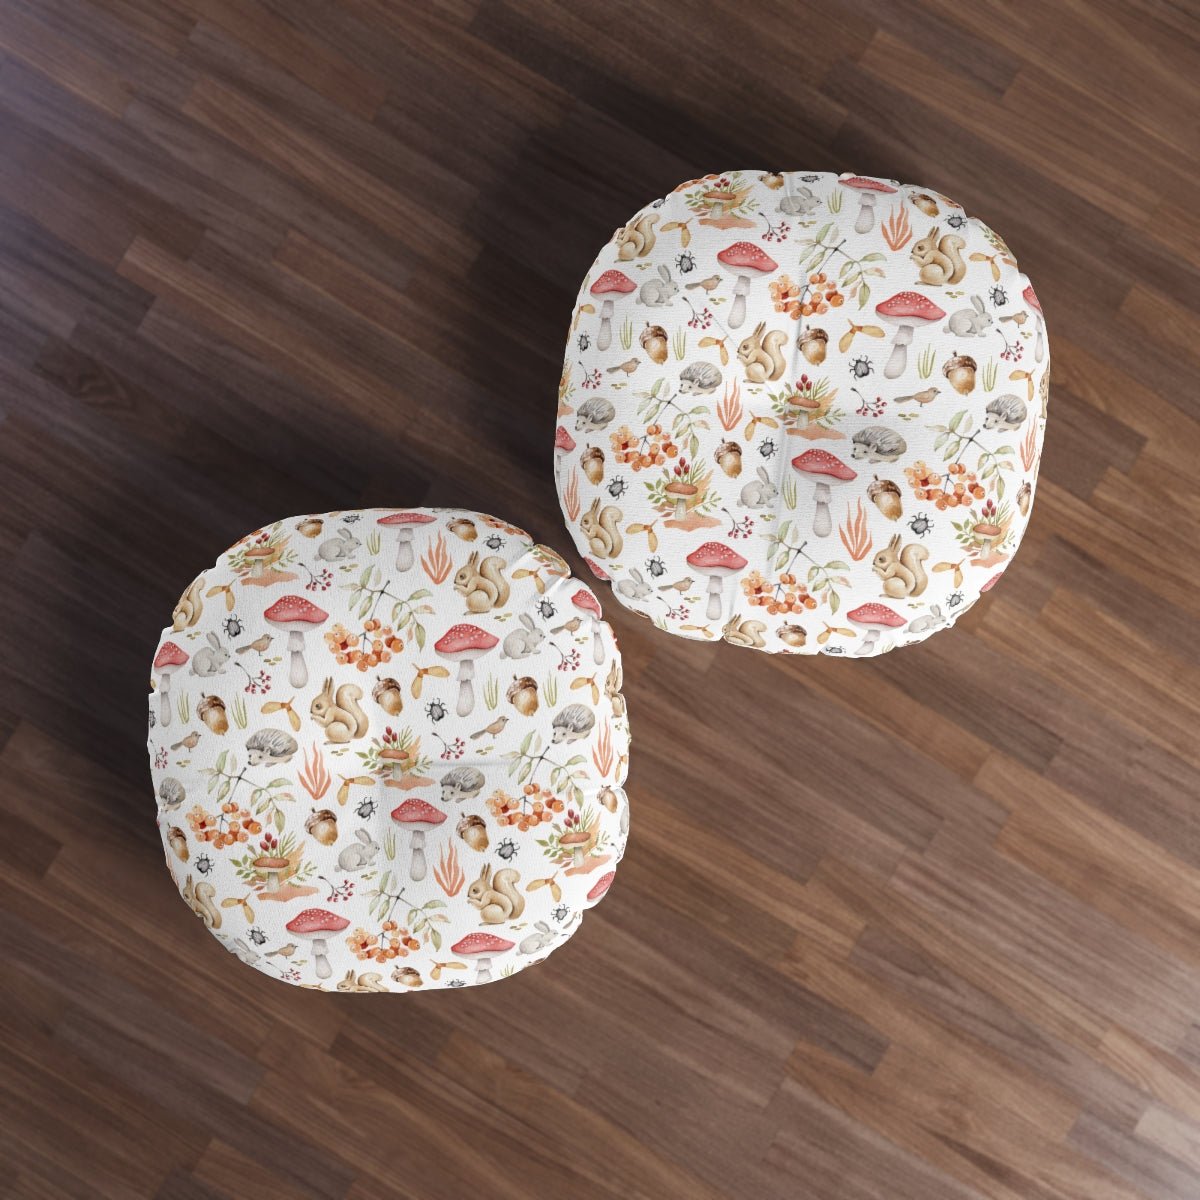 Fall Forest Animals Round Tufted Floor Pillow - Puffin Lime